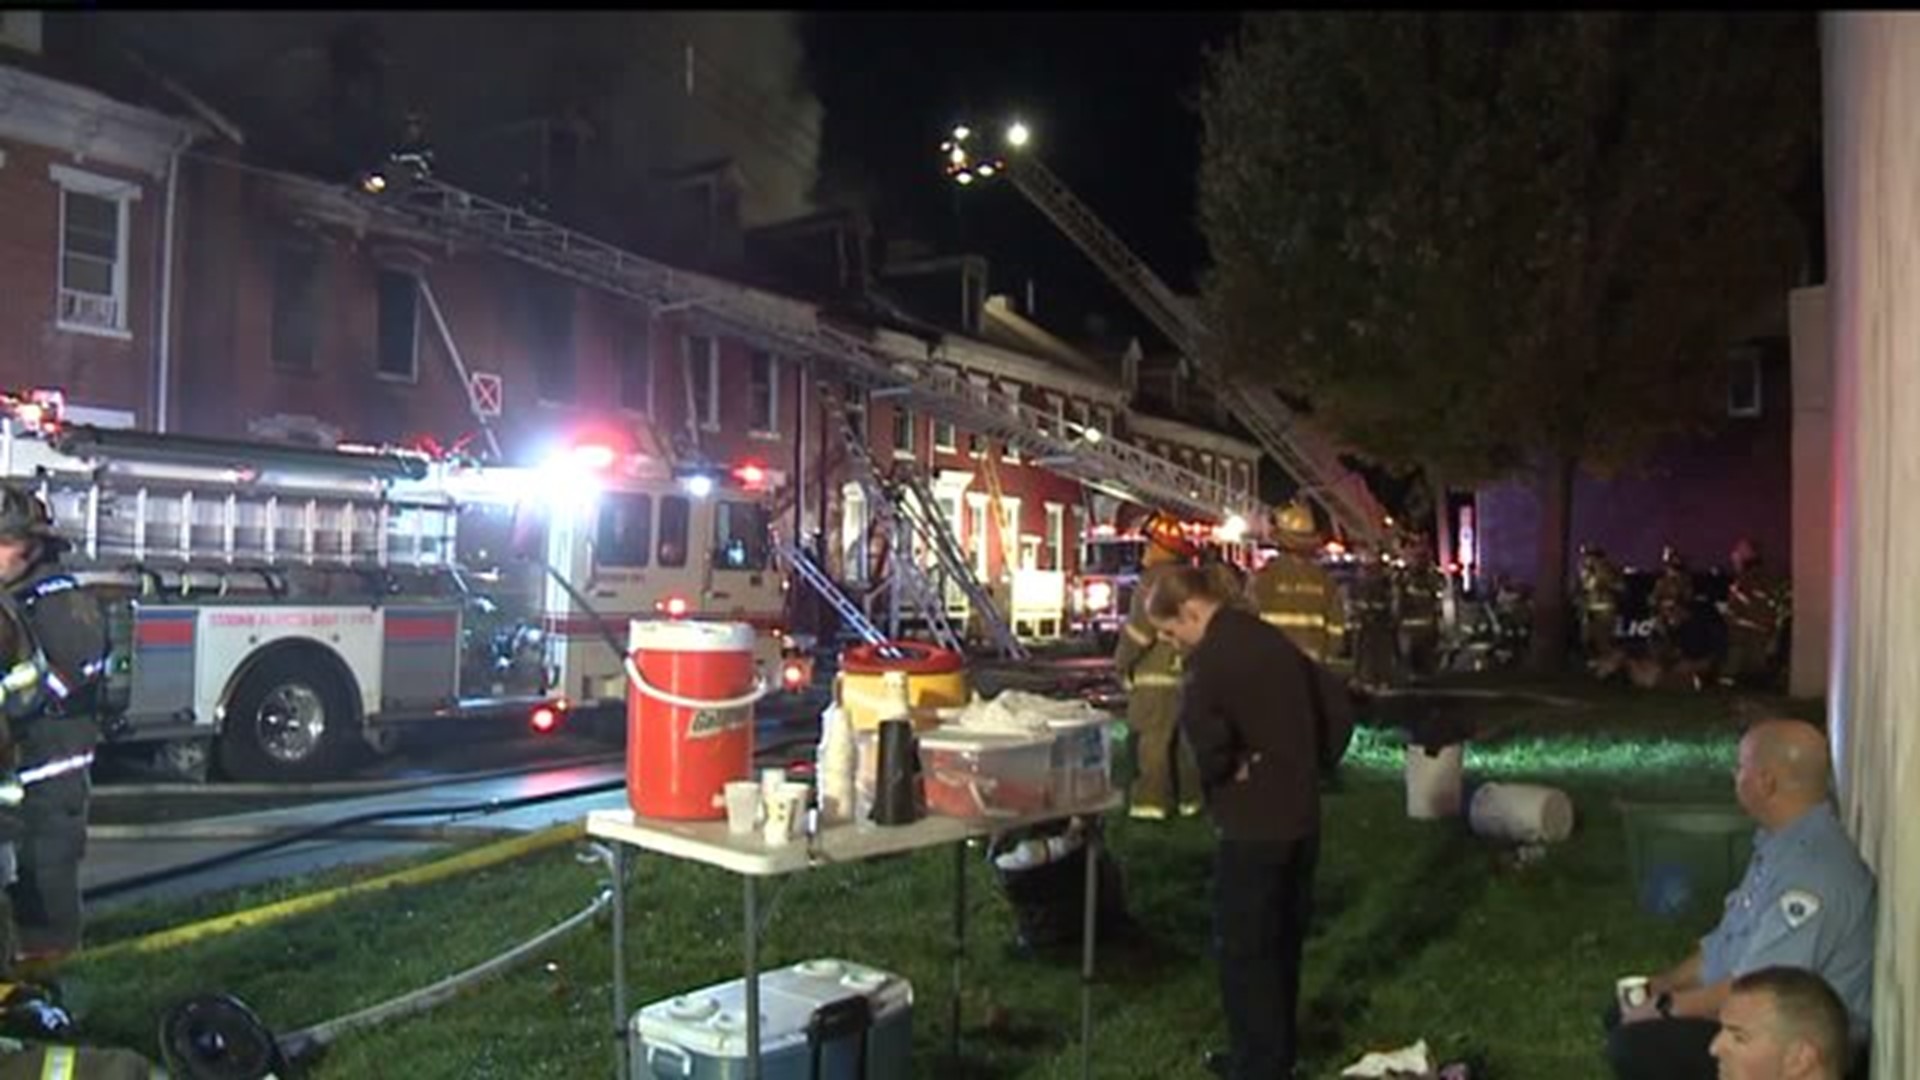 Two of three fires in York last night ruled arson; dozens displaced